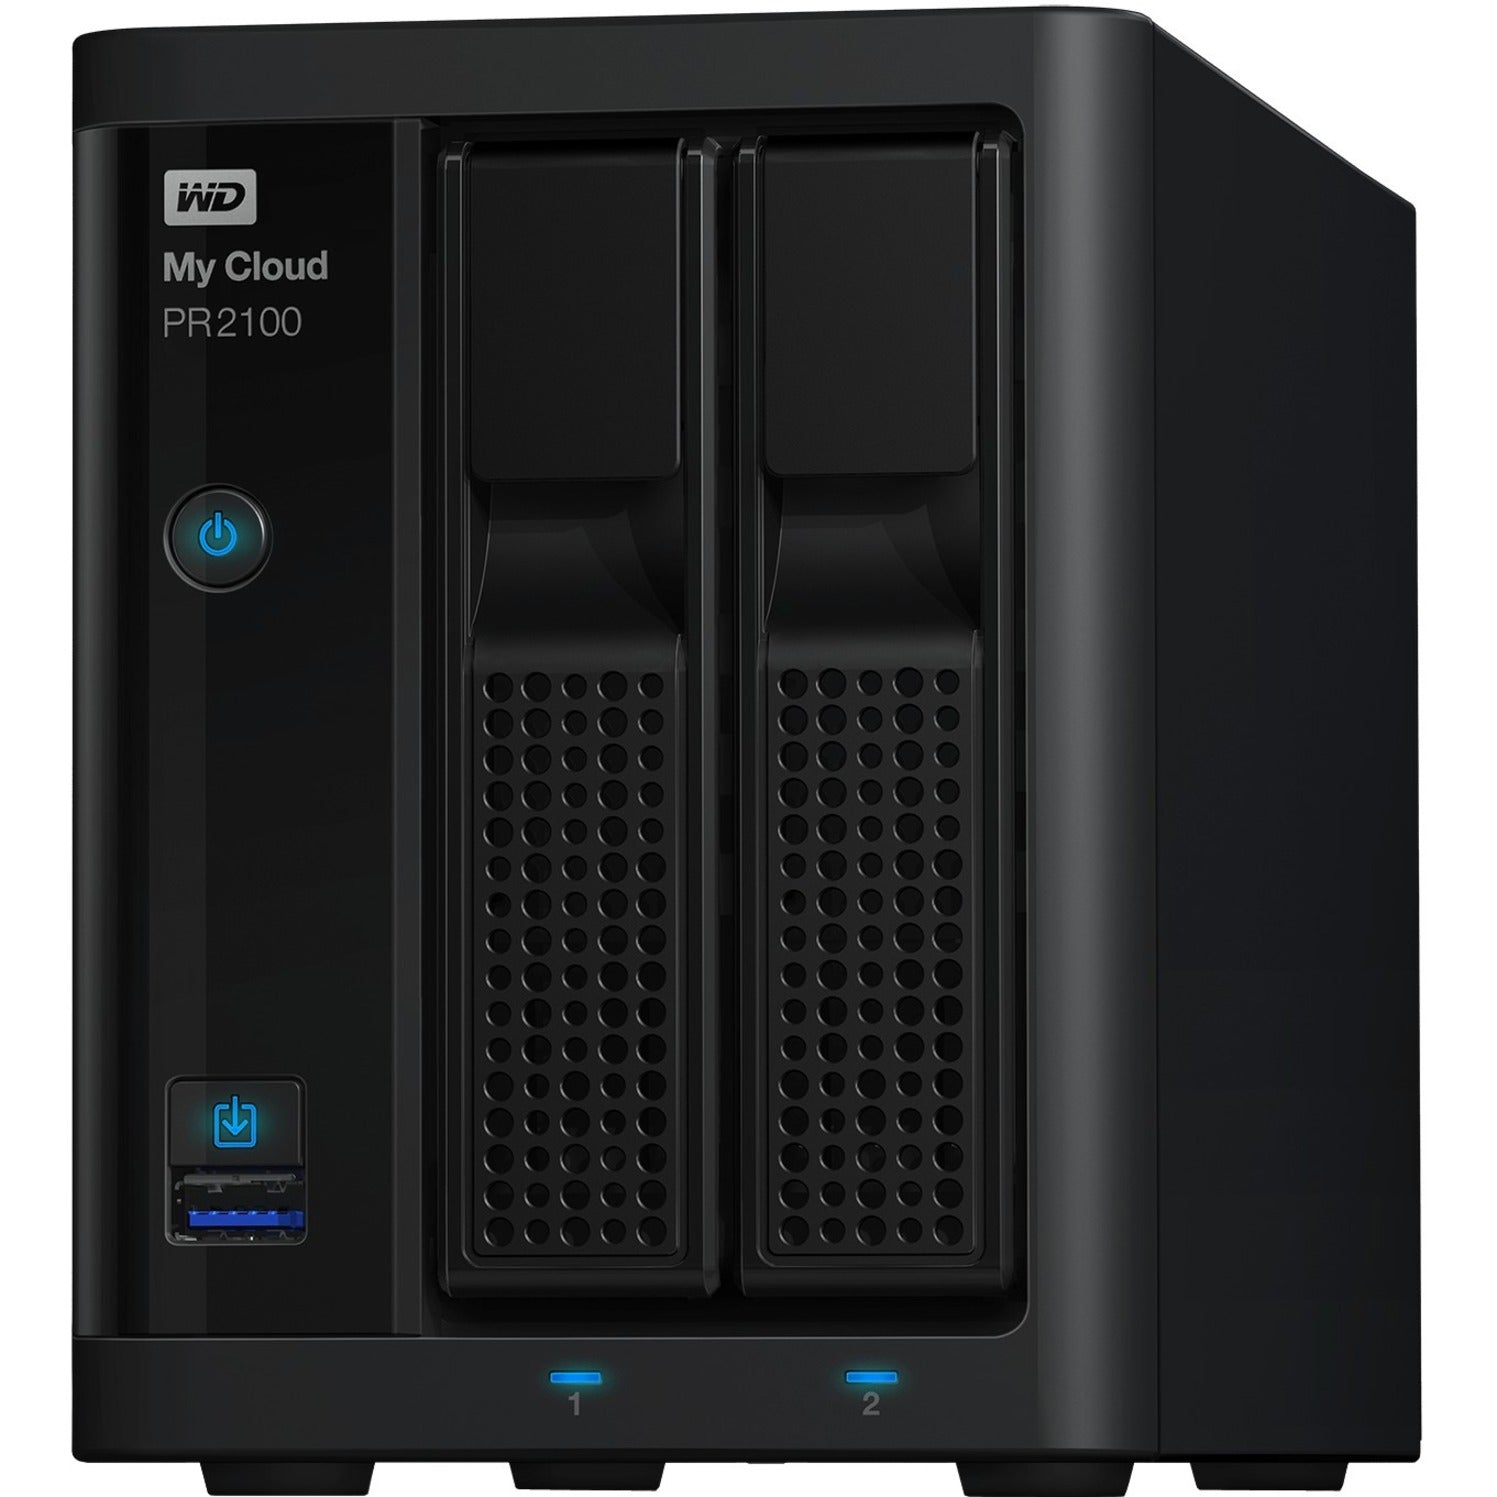 WD WDBBCL0040JBK-NESN 4TB My Cloud PR2100 Pro Series Media Server with Transcoding, NAS - Network Attached Storage